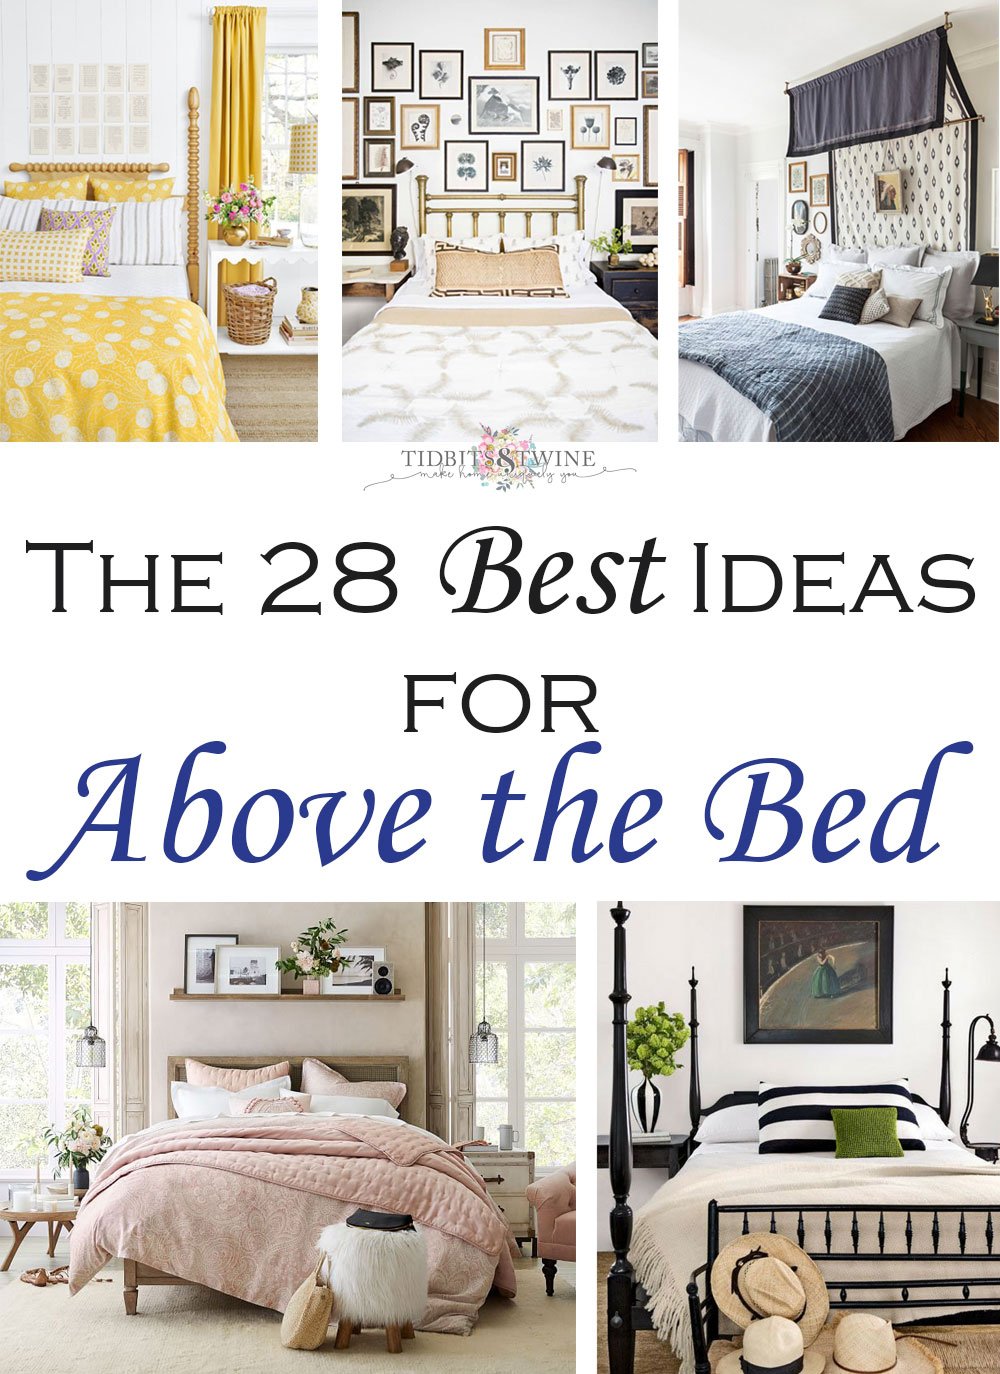 The 28 {Best} Ideas for Decorating Above the Bed